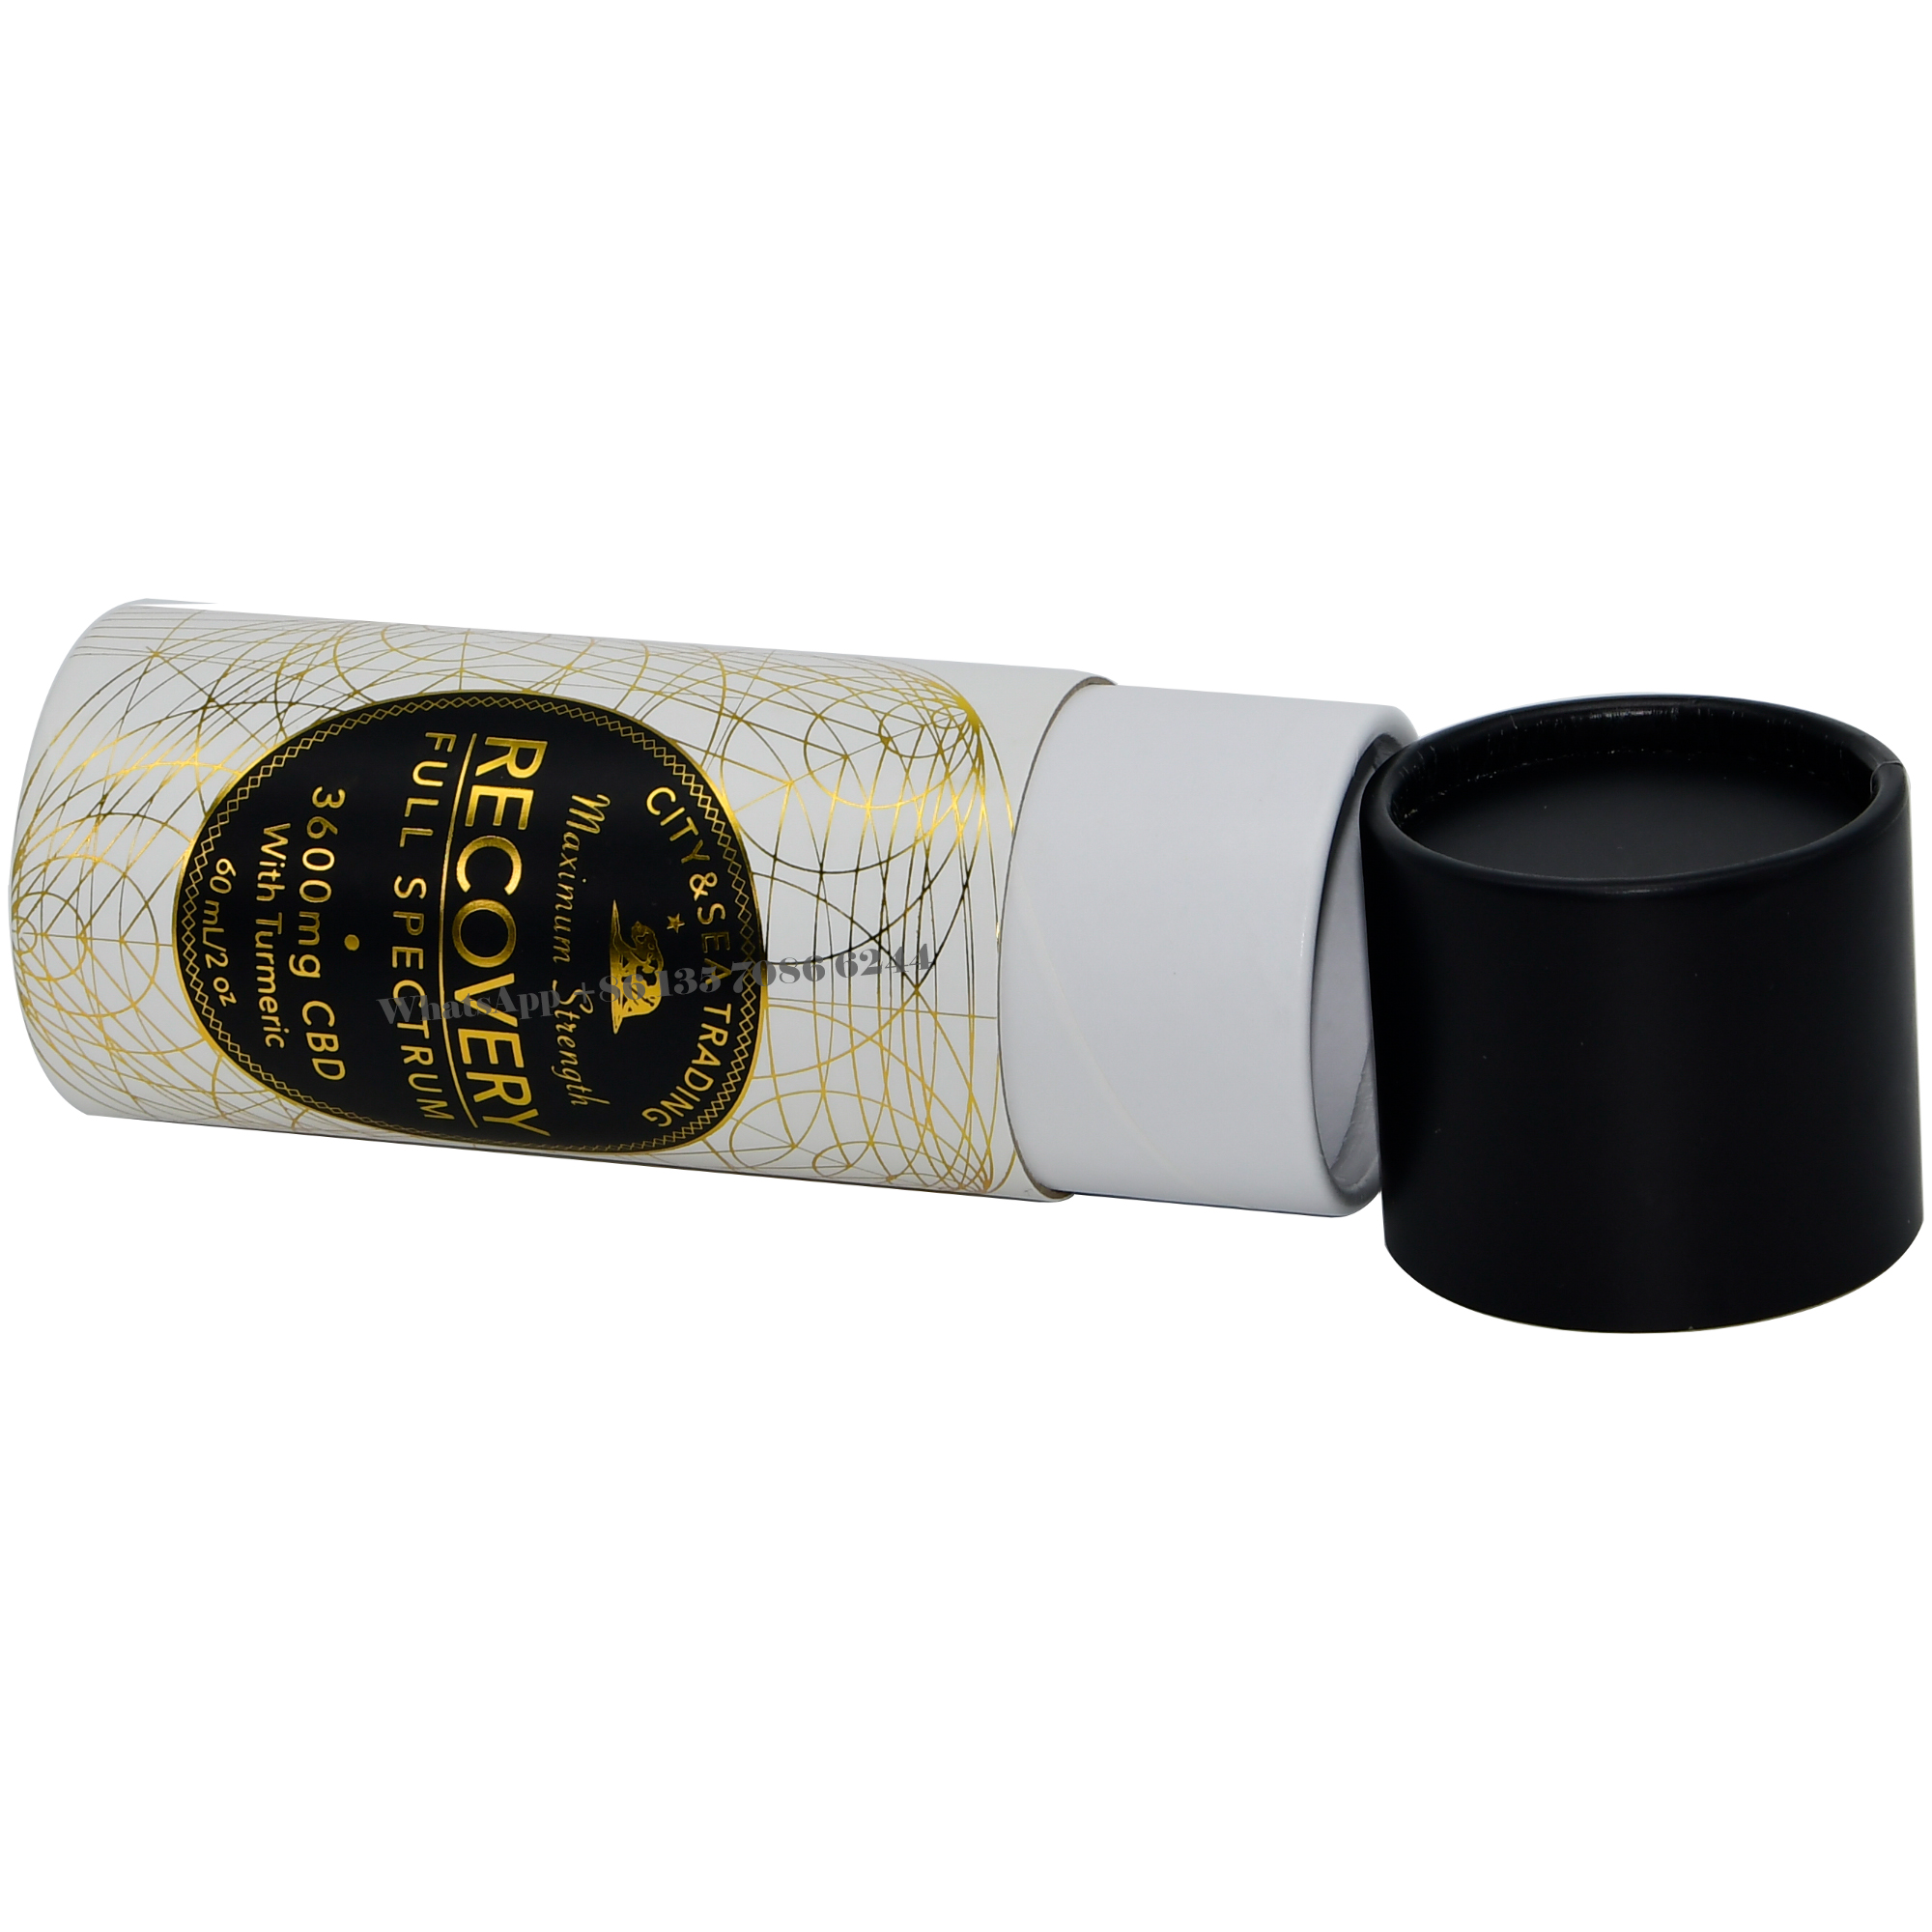  Earth-Friendly Organic CBD Oil Paper Tube Packaging Boxes  